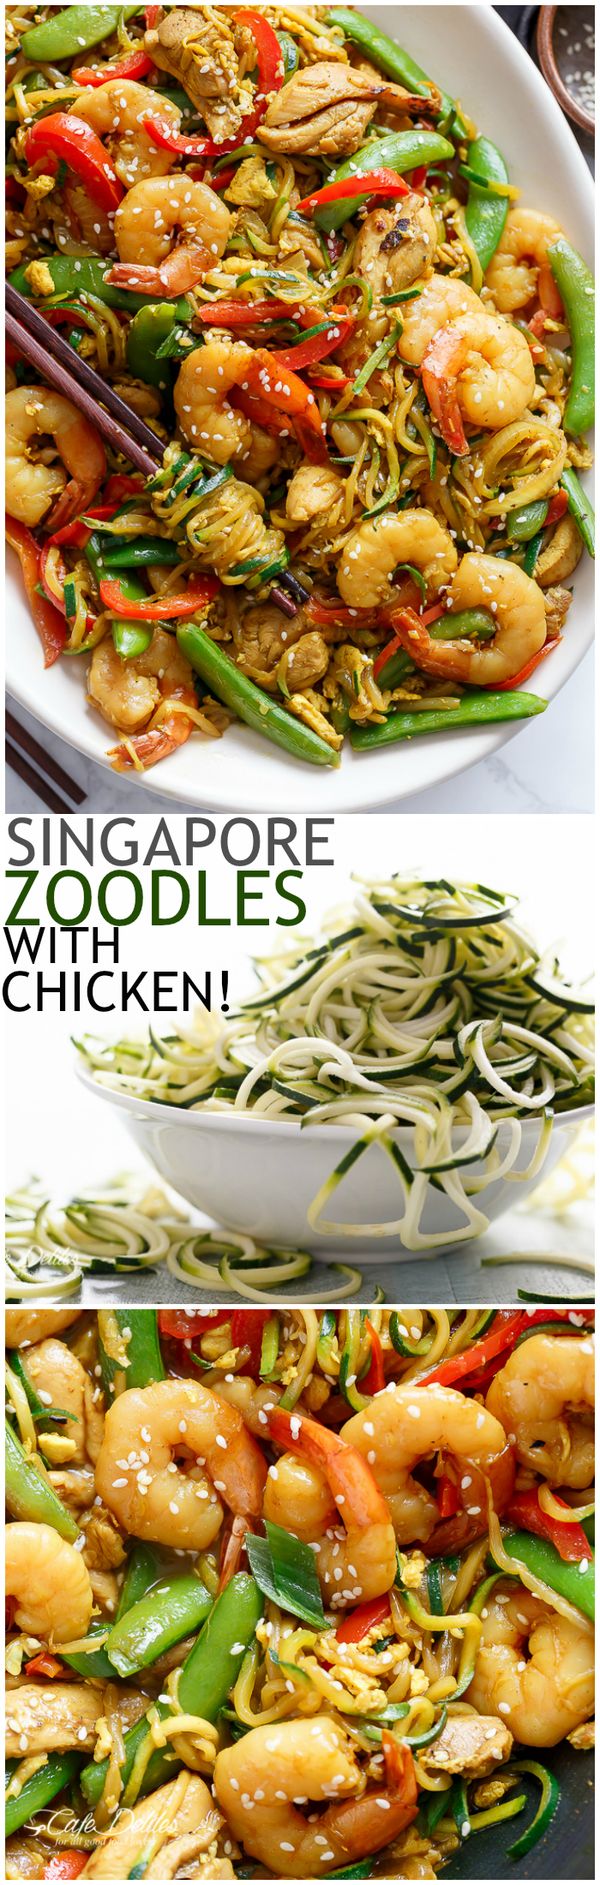 Singapore Zoodle Stir Fry With Chicken (Zucchini Noodles